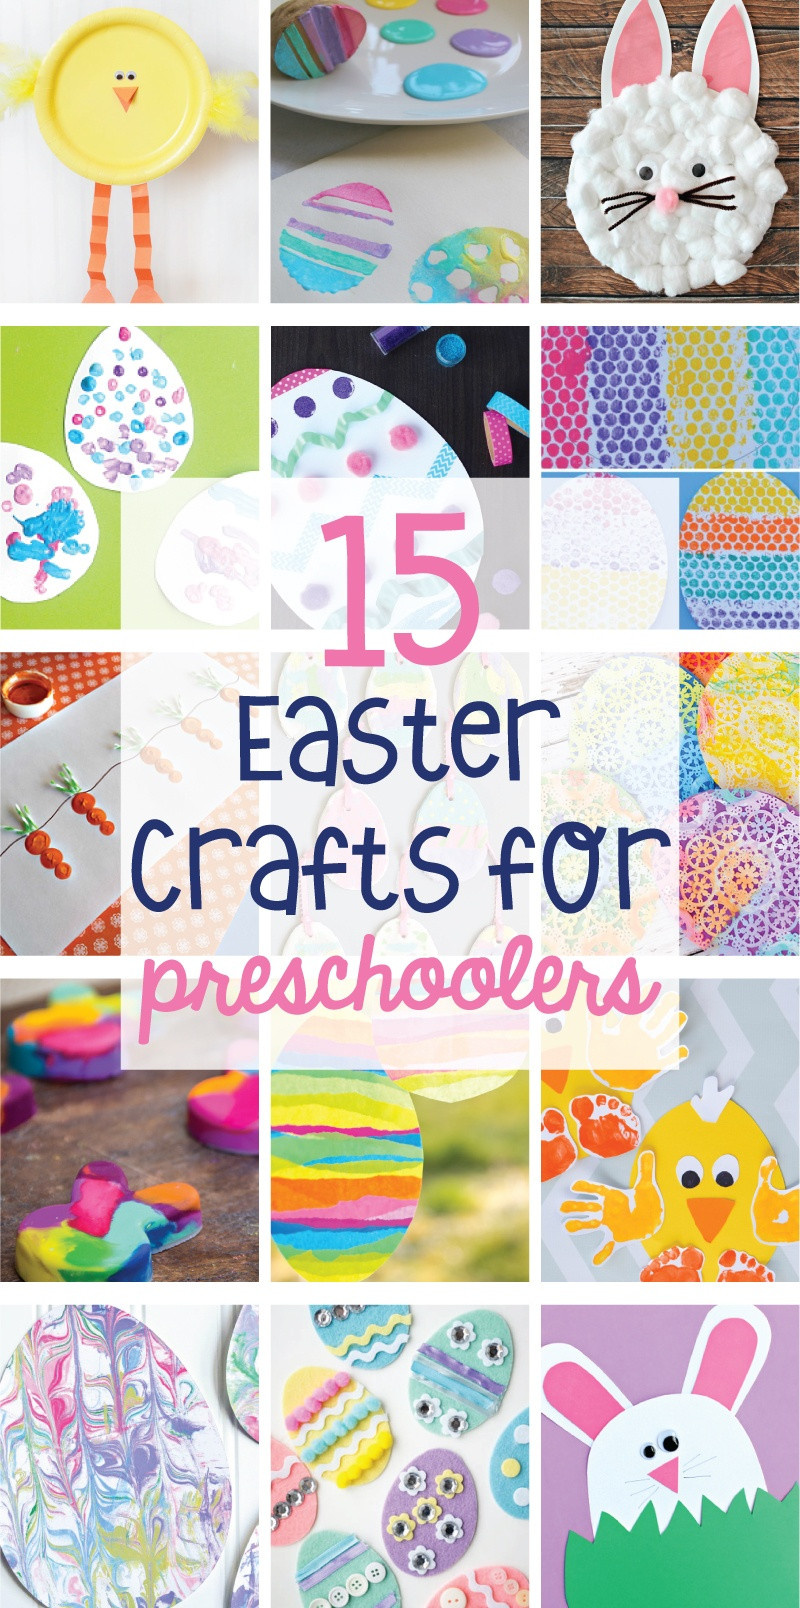 Easter Crafts For Preschoolers
 15 Easter Crafts for Preschoolers by Lindi Haws of Love